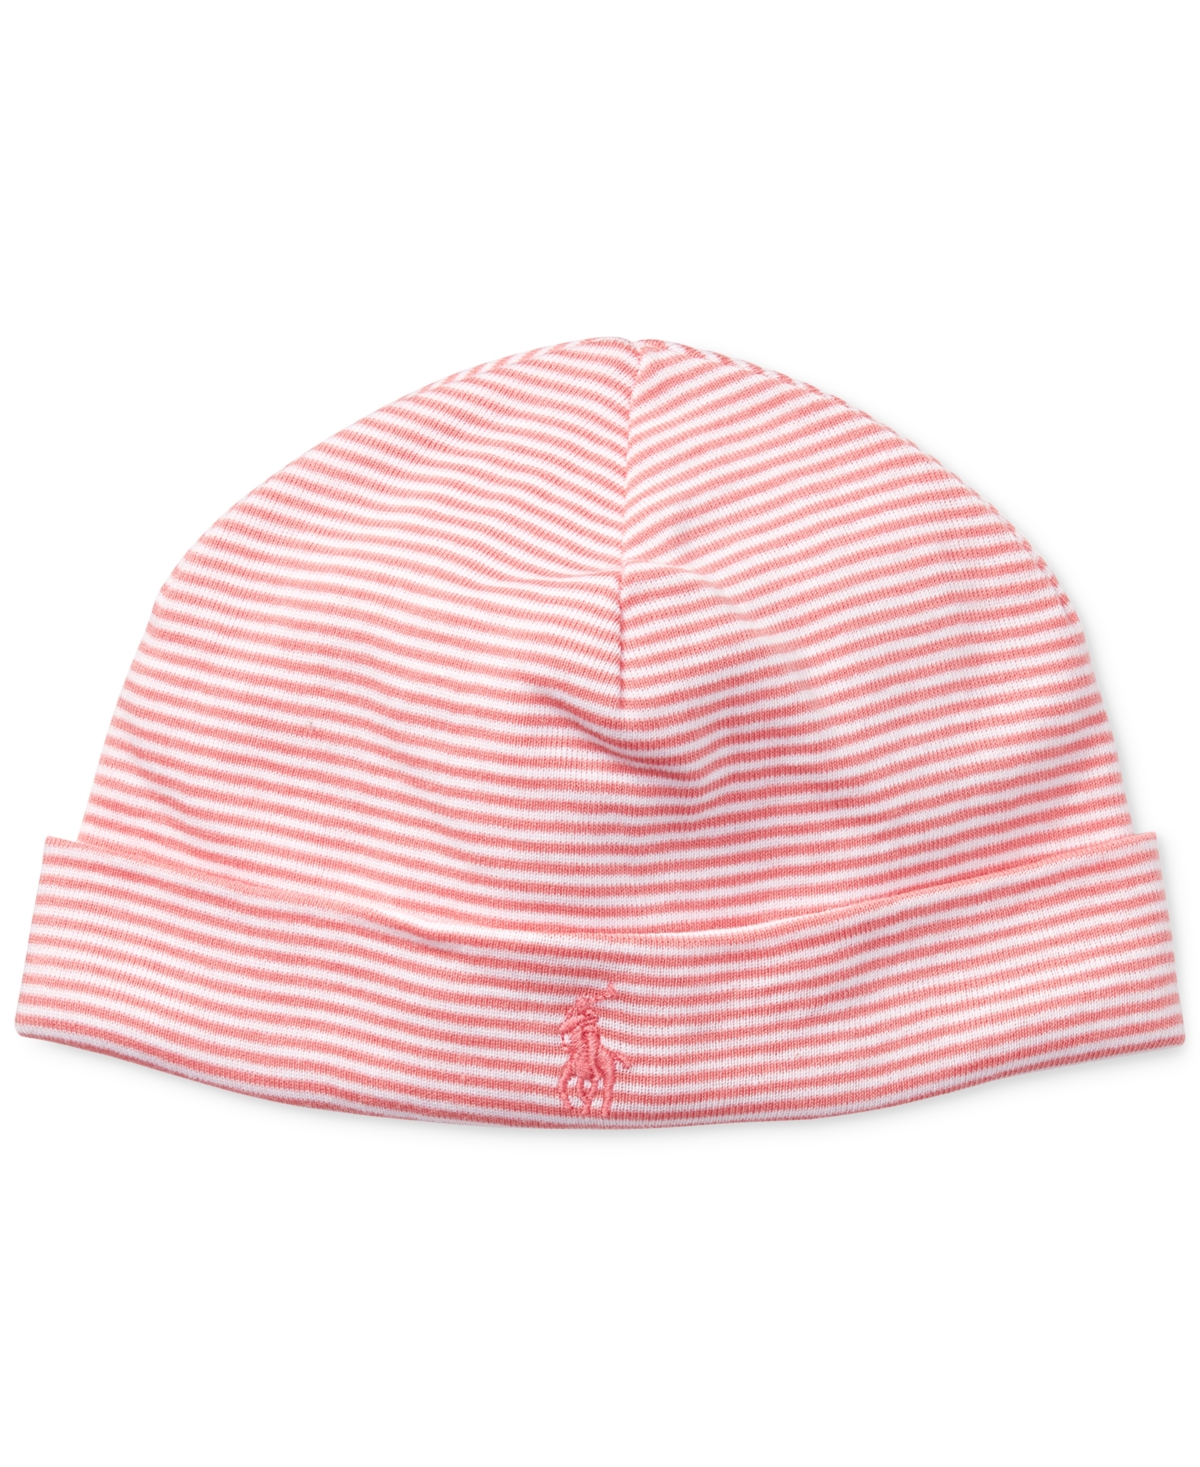 Polo Ralph Lauren Baby Girls Striped Soft Cotton Hat In Paisley Pink